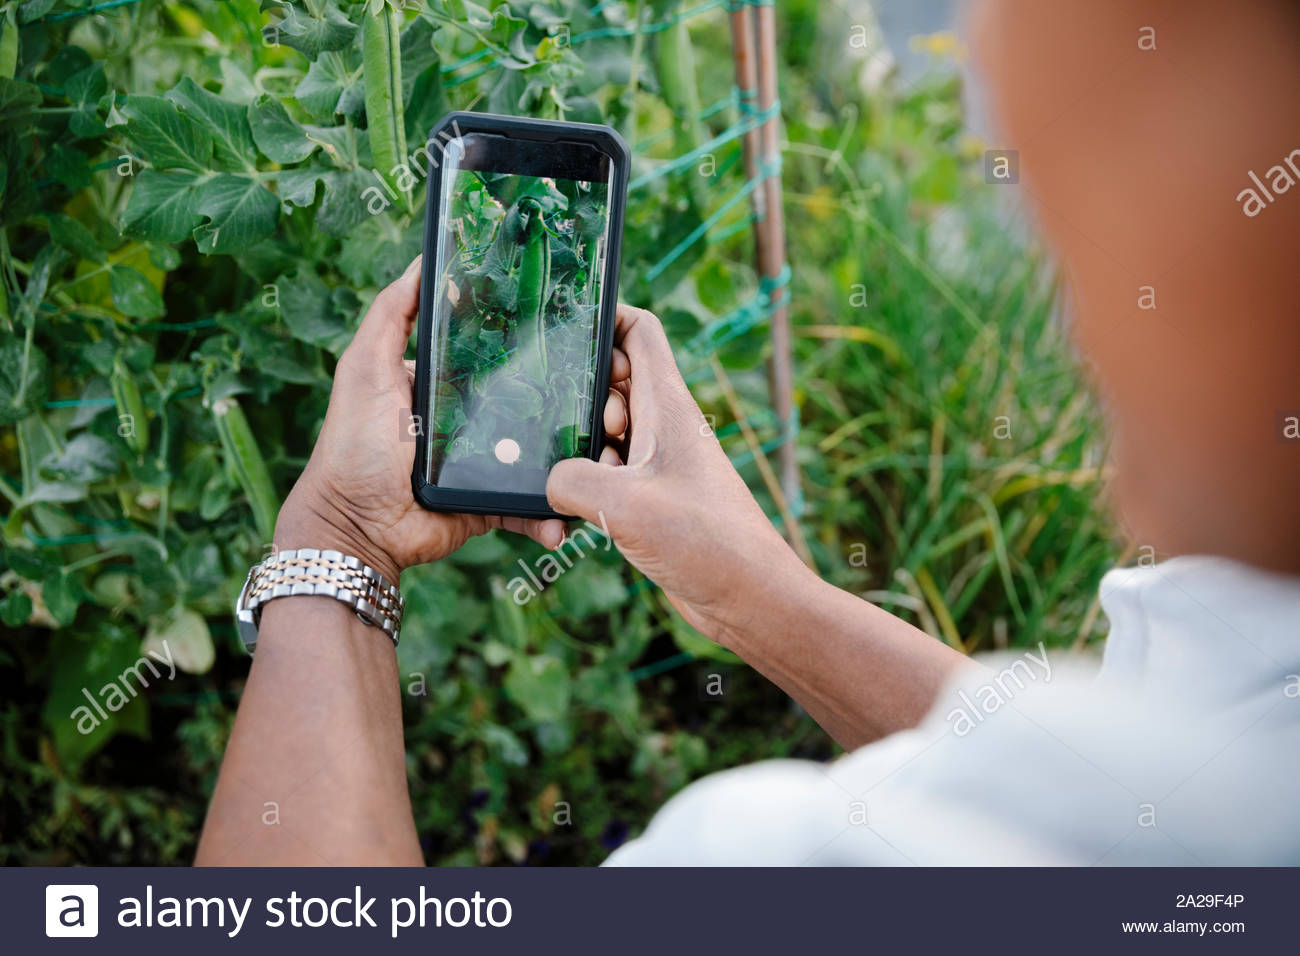 Man photographing vegetable plant with camera phone in garden Stock Photo